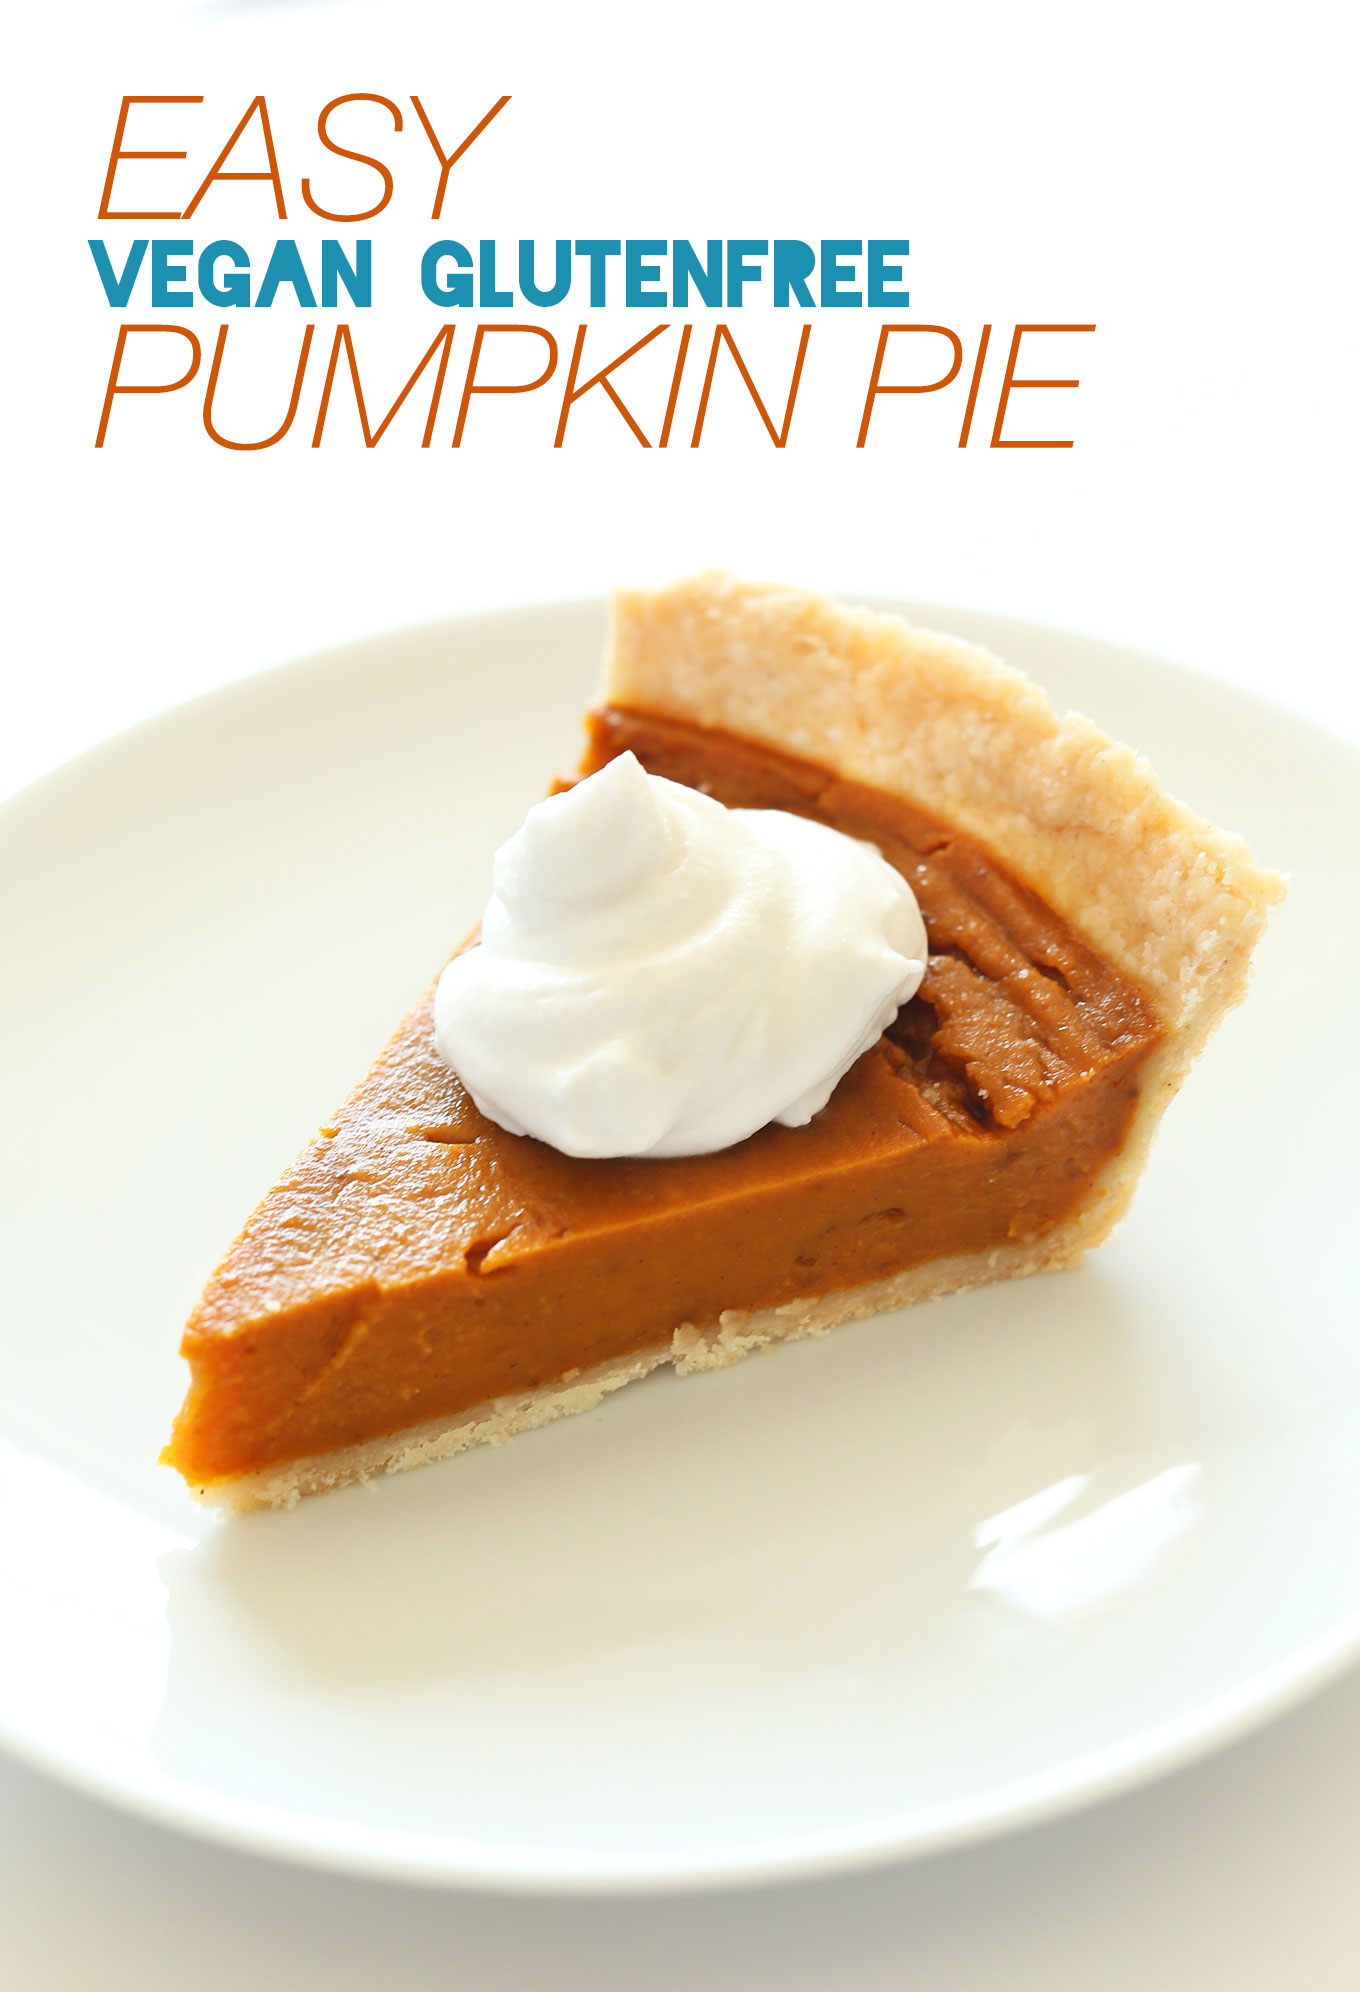 Slice of Vegan Gluten-Free Pumpkin Pie topped with coconut whipped cream